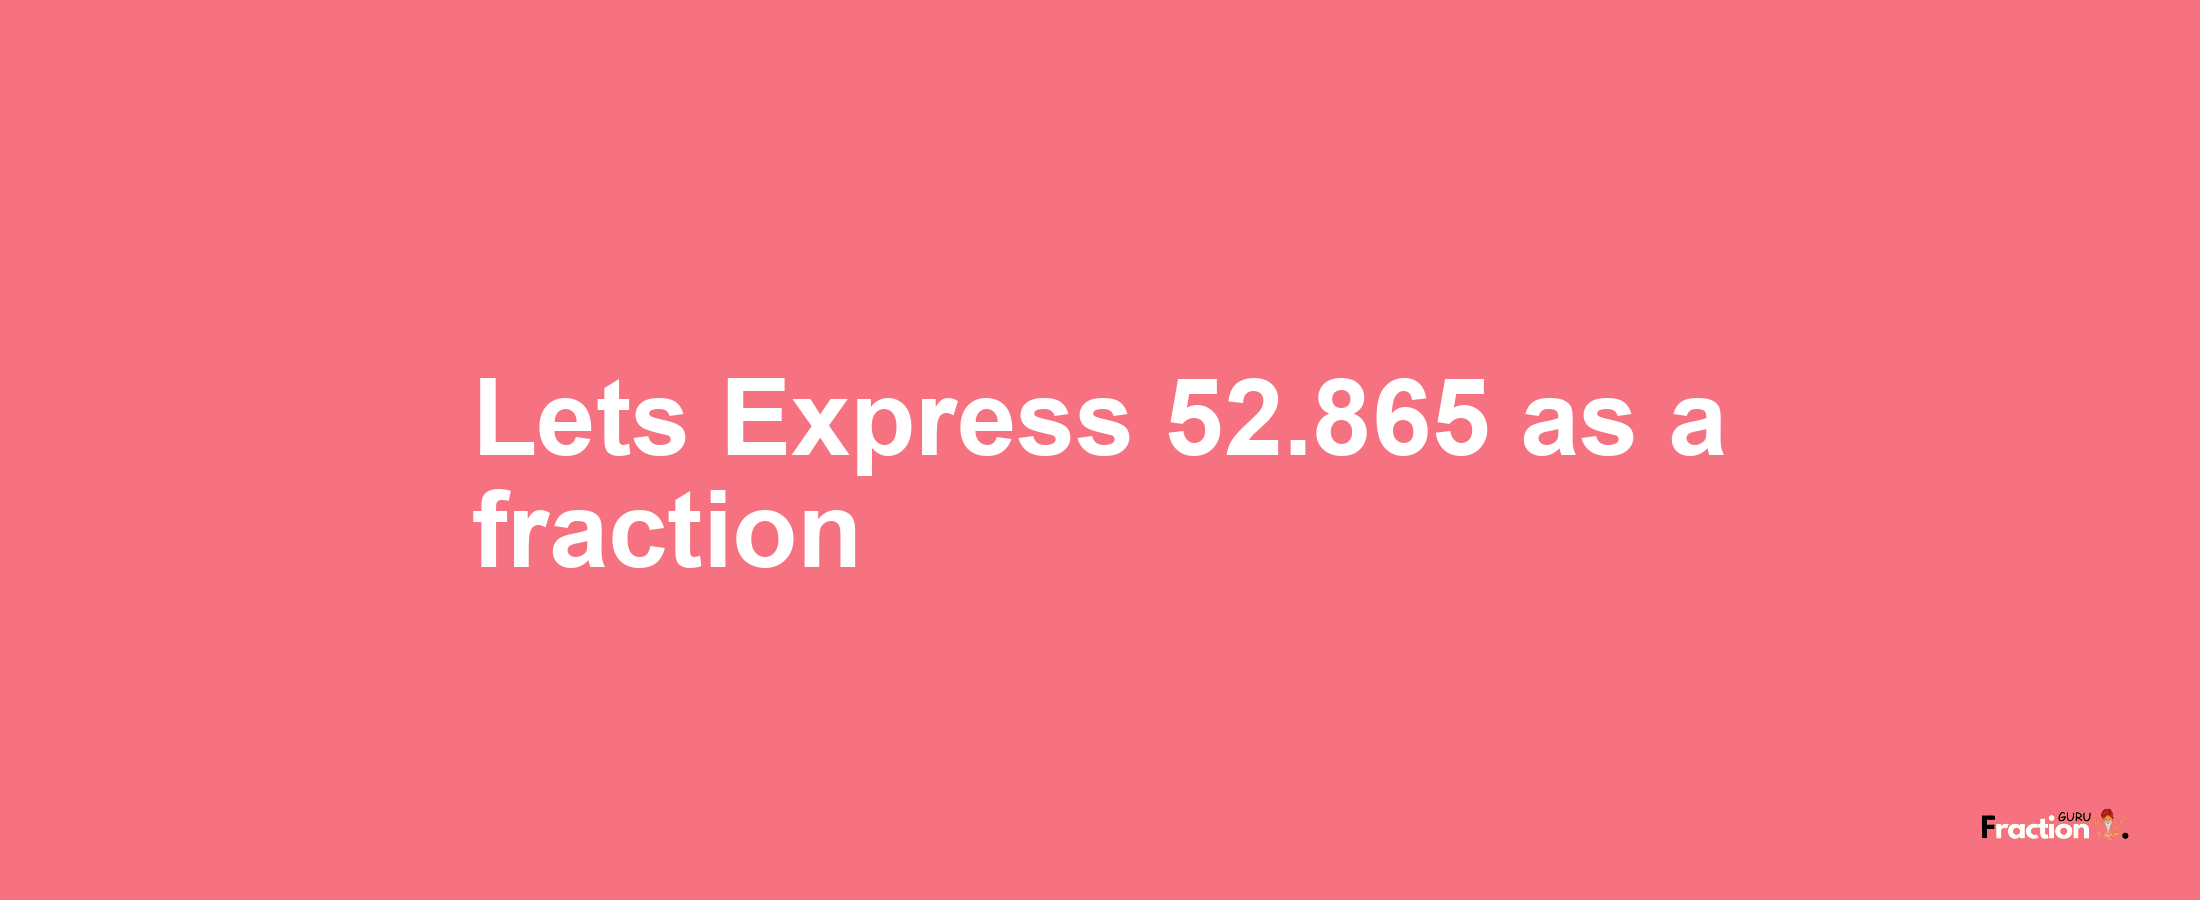 Lets Express 52.865 as afraction